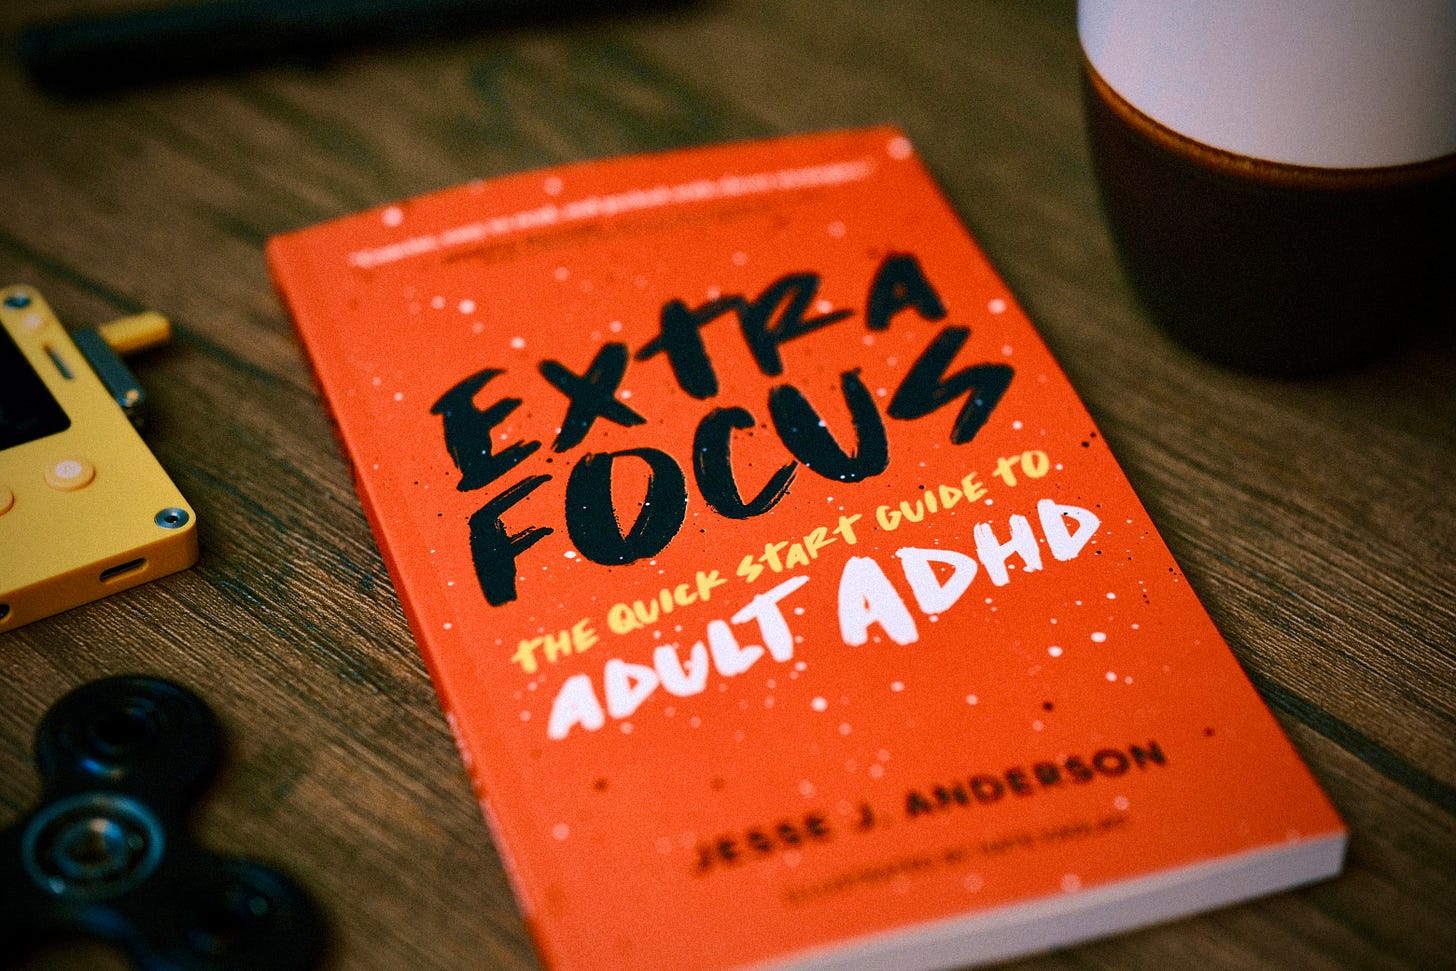 An artistic photo of the Extra Focus: The Quick Start Guide to Adult ADHD book, on a wooden table surrounded by some figet toys and a cup of coffee. On a lovely dark wooden table.